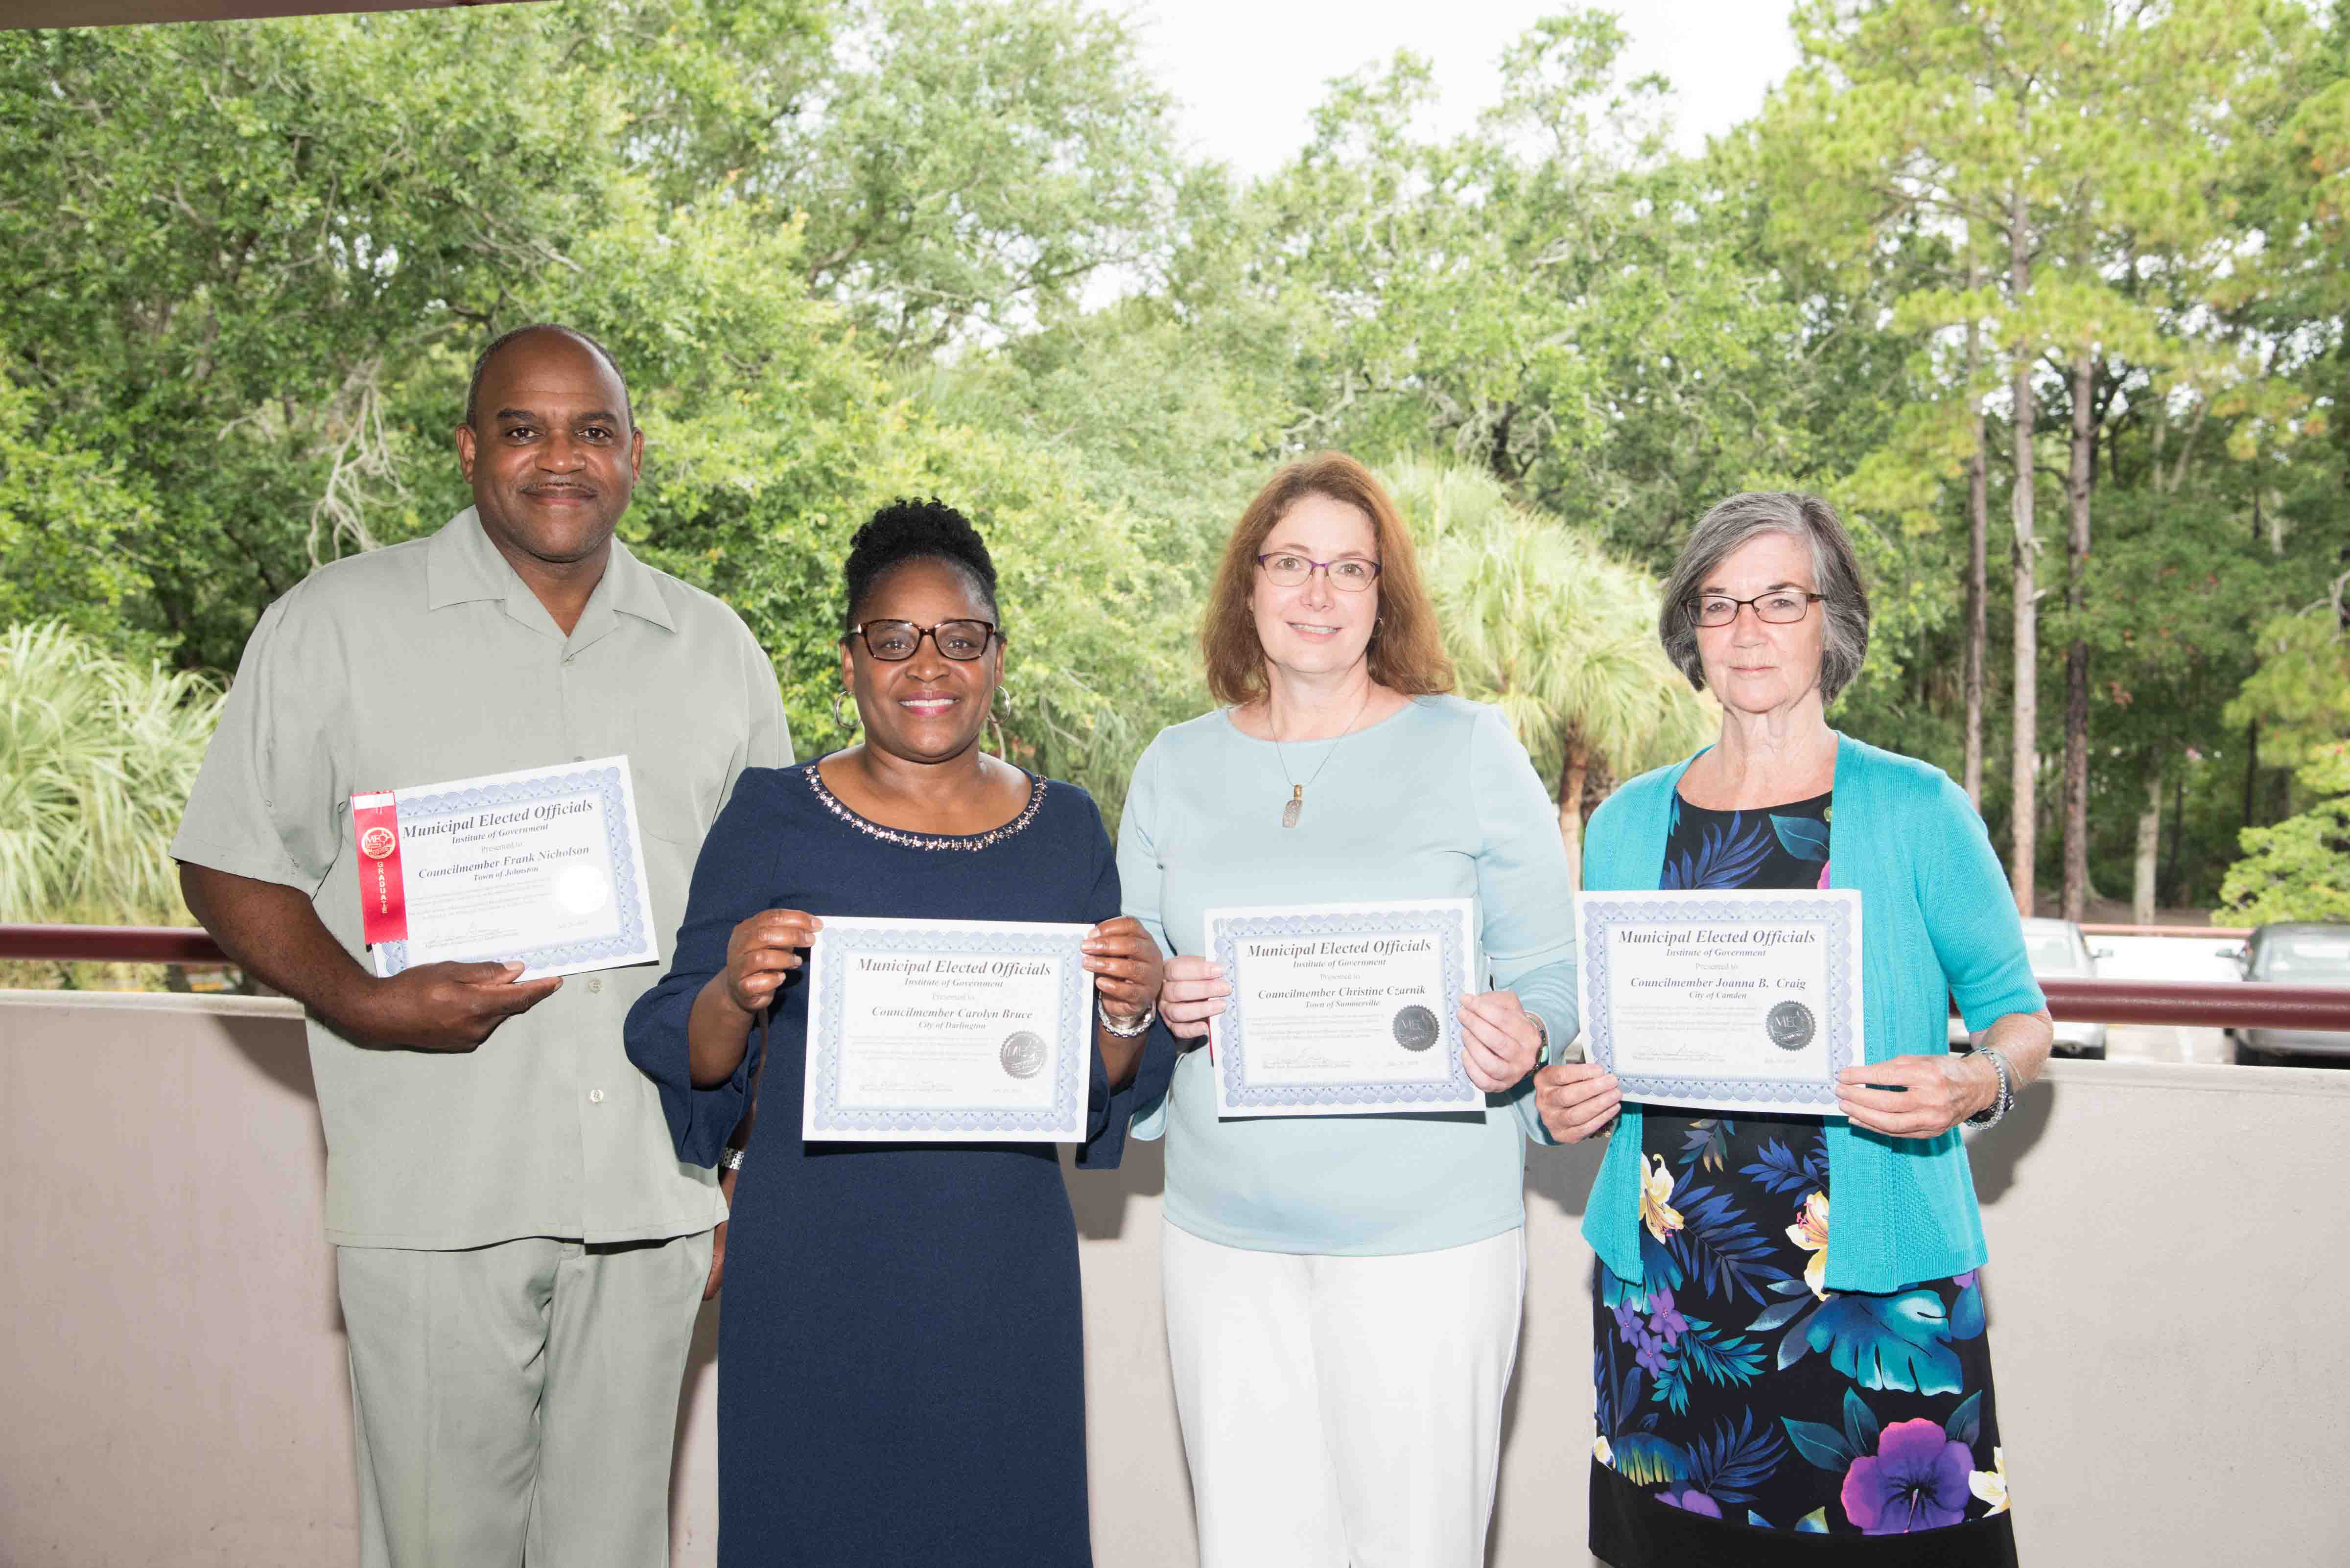 2018 Municipal Elected Officials Institute of Government Summer Graduates